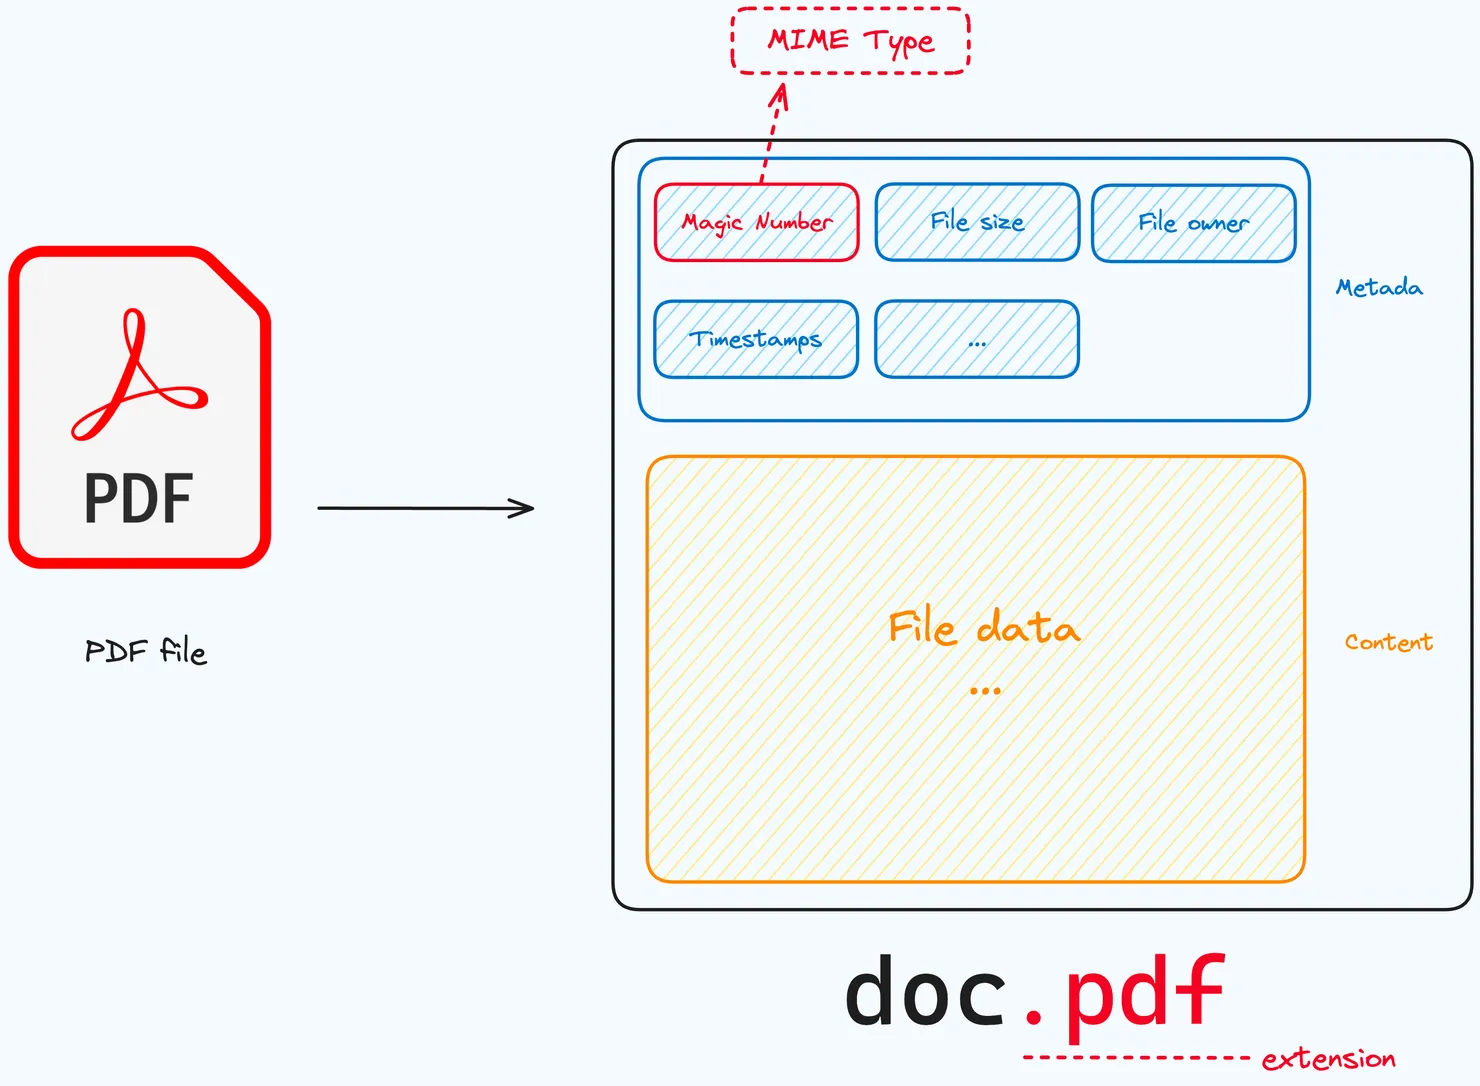 Visual breakdown of a PDF file&#x27;s anatomy emphasizing security elements. Key metadata like MIME type and magic number are highlighted, suggesting their role in content security and integrity checks.